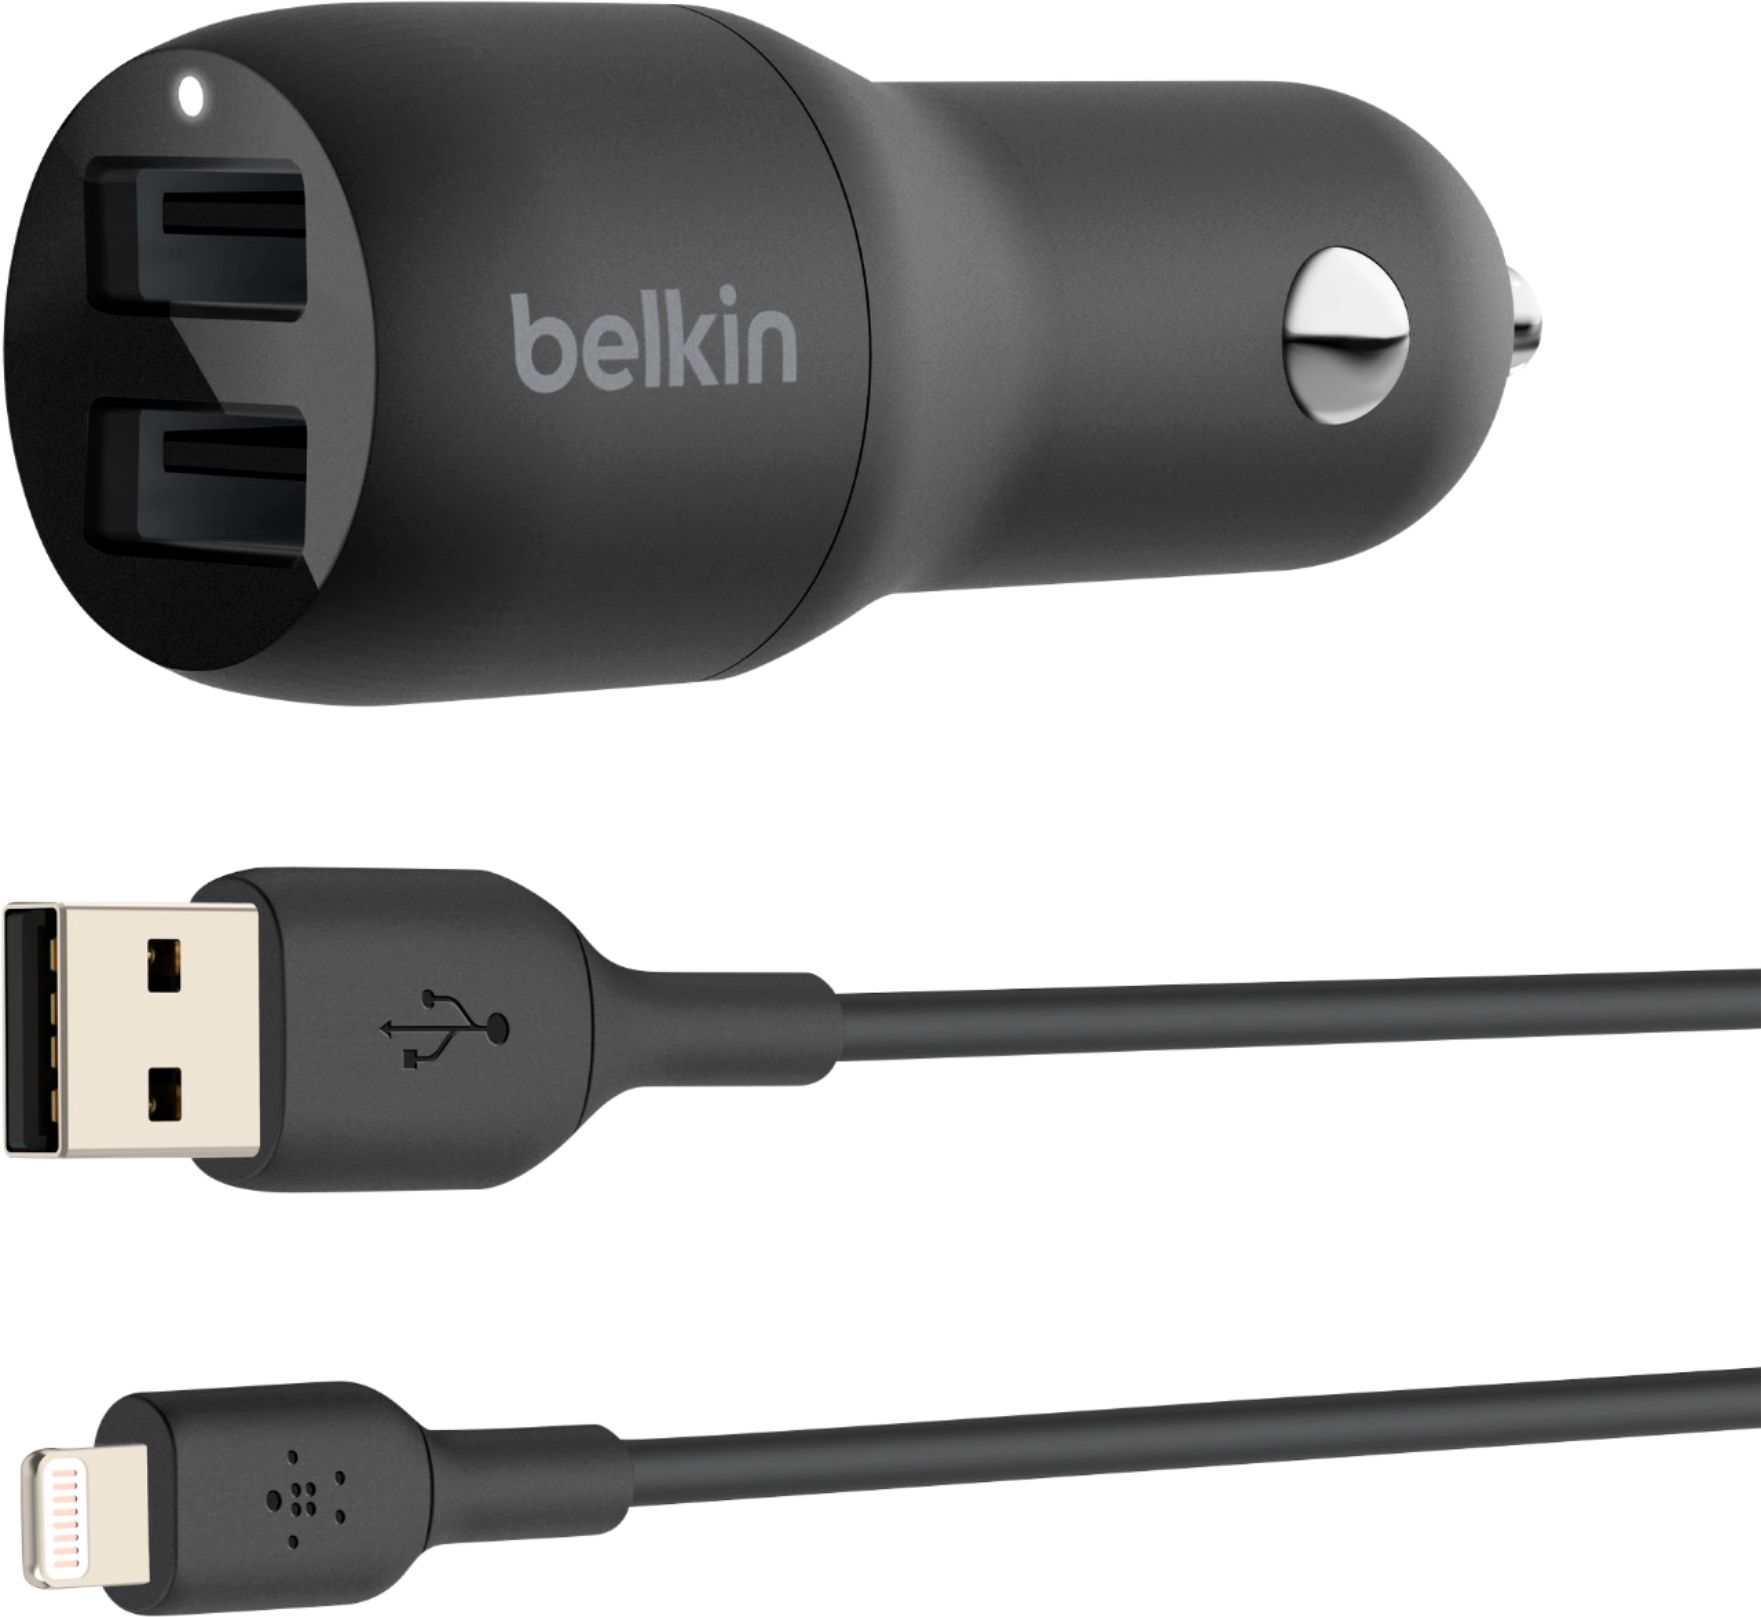 Wantrouwen Geniet Duidelijk maken Belkin 24W Dual USB Car Charger with Lightning Cable and 2 12W USB-A ports  fast charge iPhone, Samsung Galaxy, and more Black CCD001bt1MBK - Best Buy